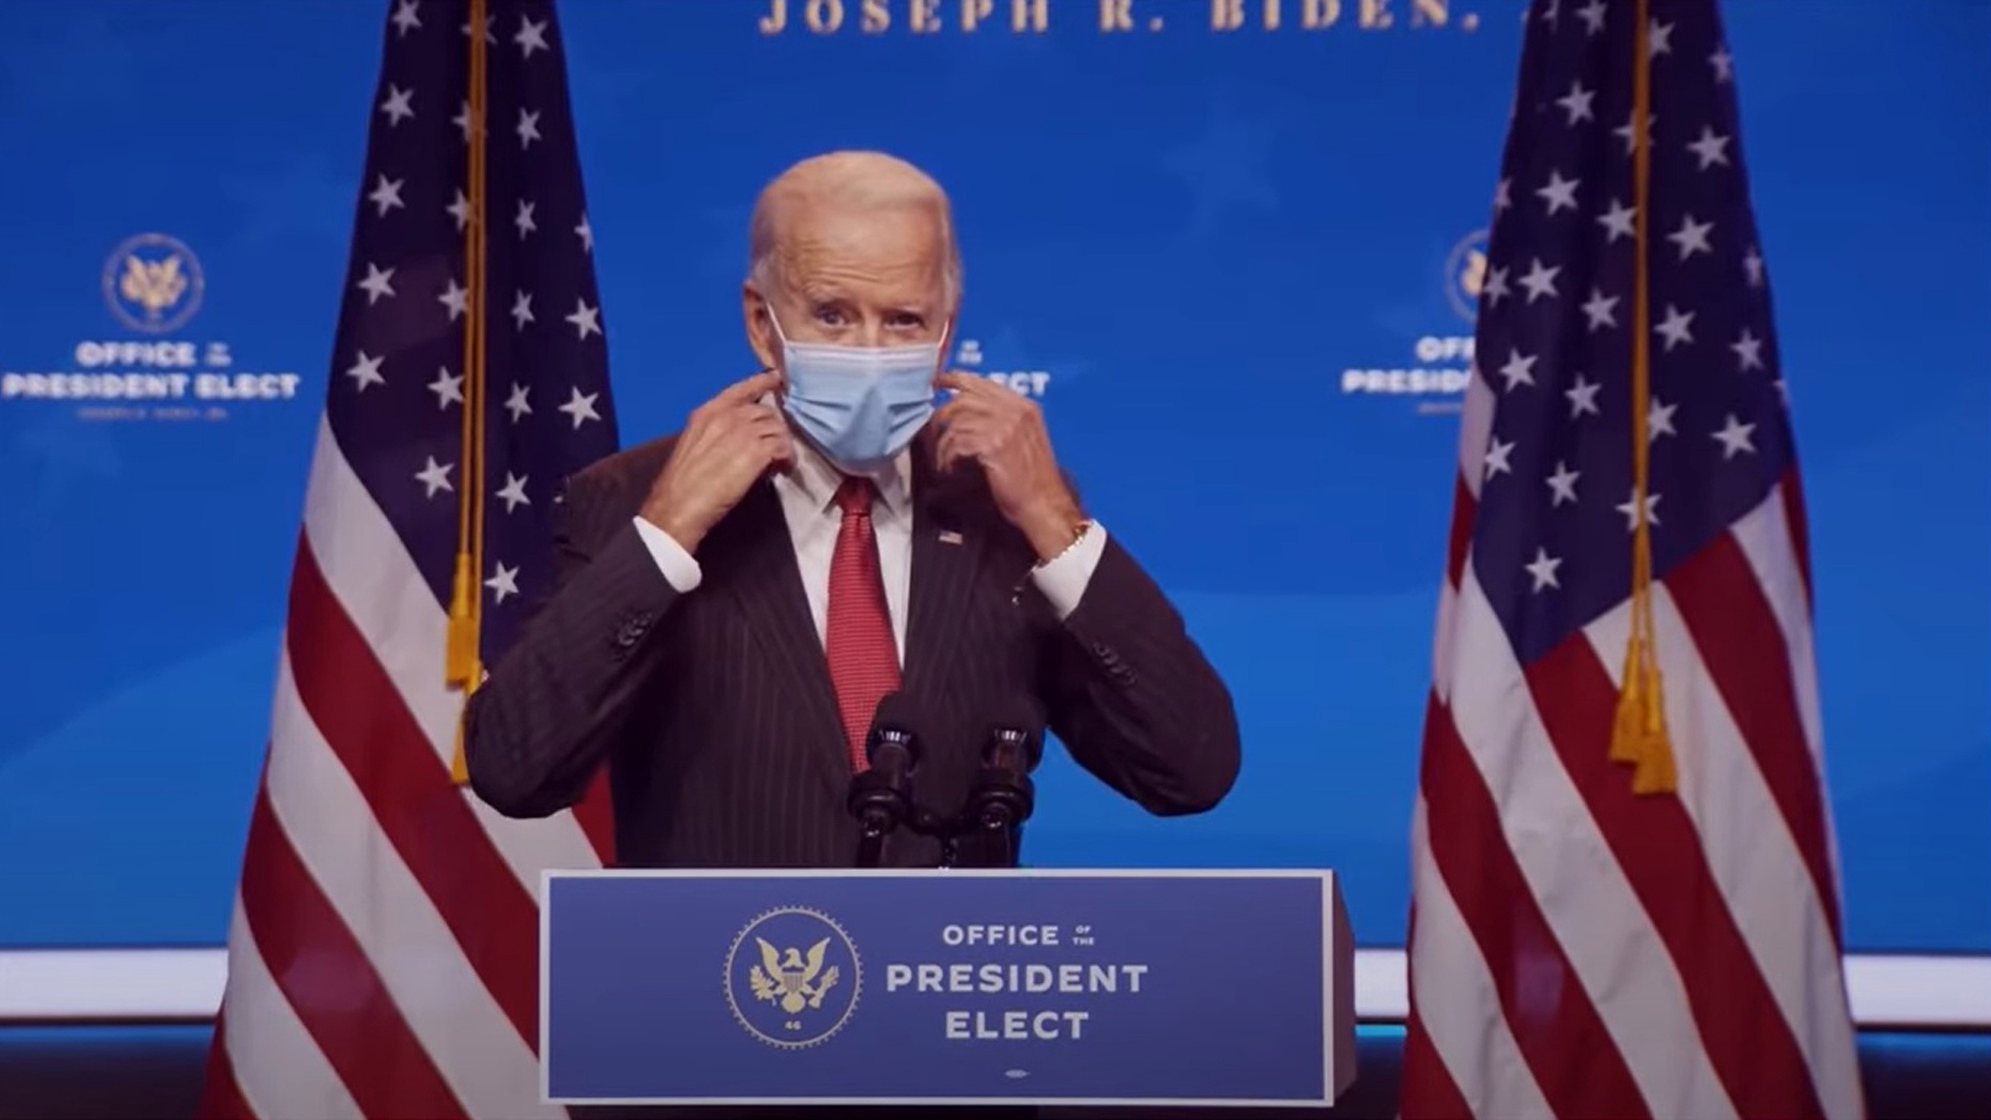 epa08830983 A frame grab from a handout video released by the Office of the President Elect shows US President-Elect Joseph R. Biden removing his face mask before addressing the media during a press conference in Wilmington, Delaware, USA, 19 November 2020 (issued 20 November 2020). Georgia state authorities confirmed 19 November US President-elect Joe Biden won the the election in Georgia following a recount. It was the first time the Democrats won a presidential election race in Georgia since 1992 when Bill Clinton was elected.  EPA/OFFICE OF THE PRESIDENT ELECT/HANDOUT BEST QUALITY AVAILABLE HANDOUT EDITORIAL USE ONLY/NO SALES